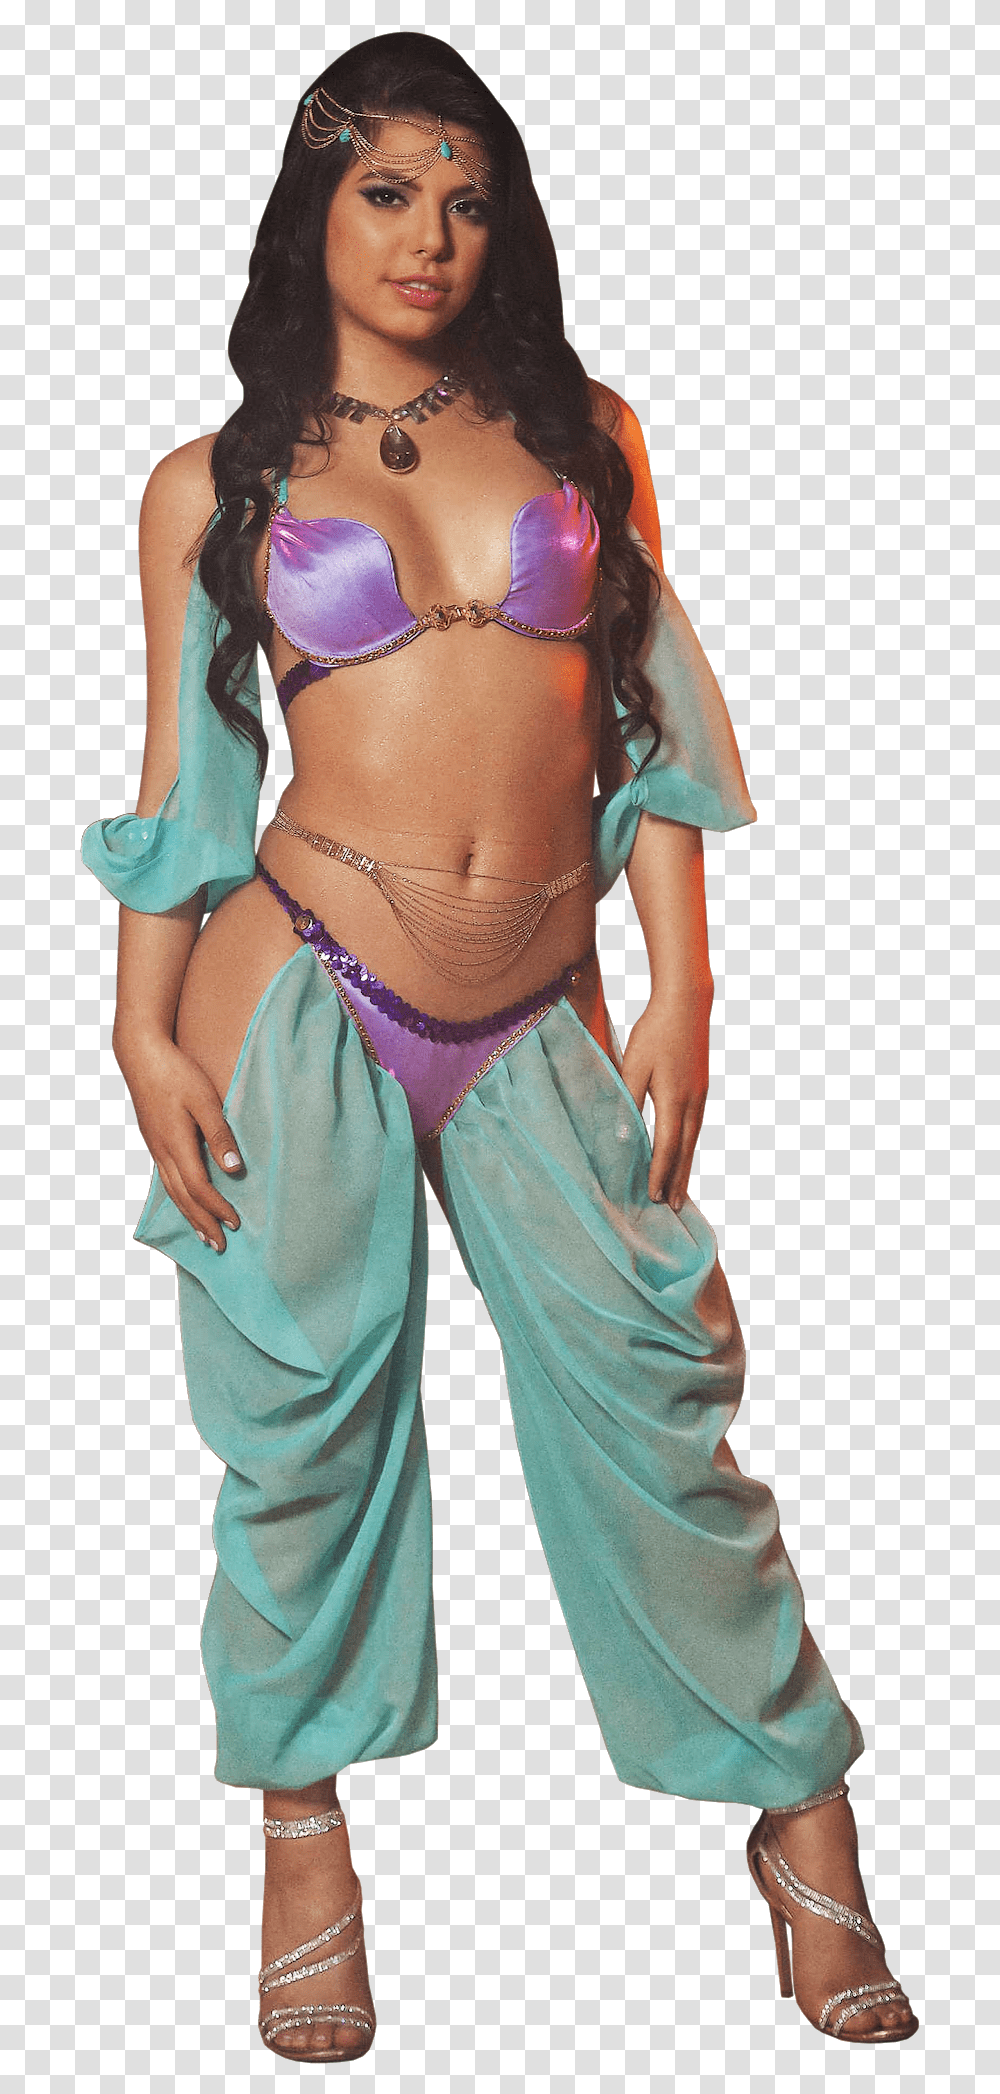 Download Gina Valentina Sexy Outfit Image For Free Gina Valentina, Person, Clothing, Costume, Leisure Activities Transparent Png